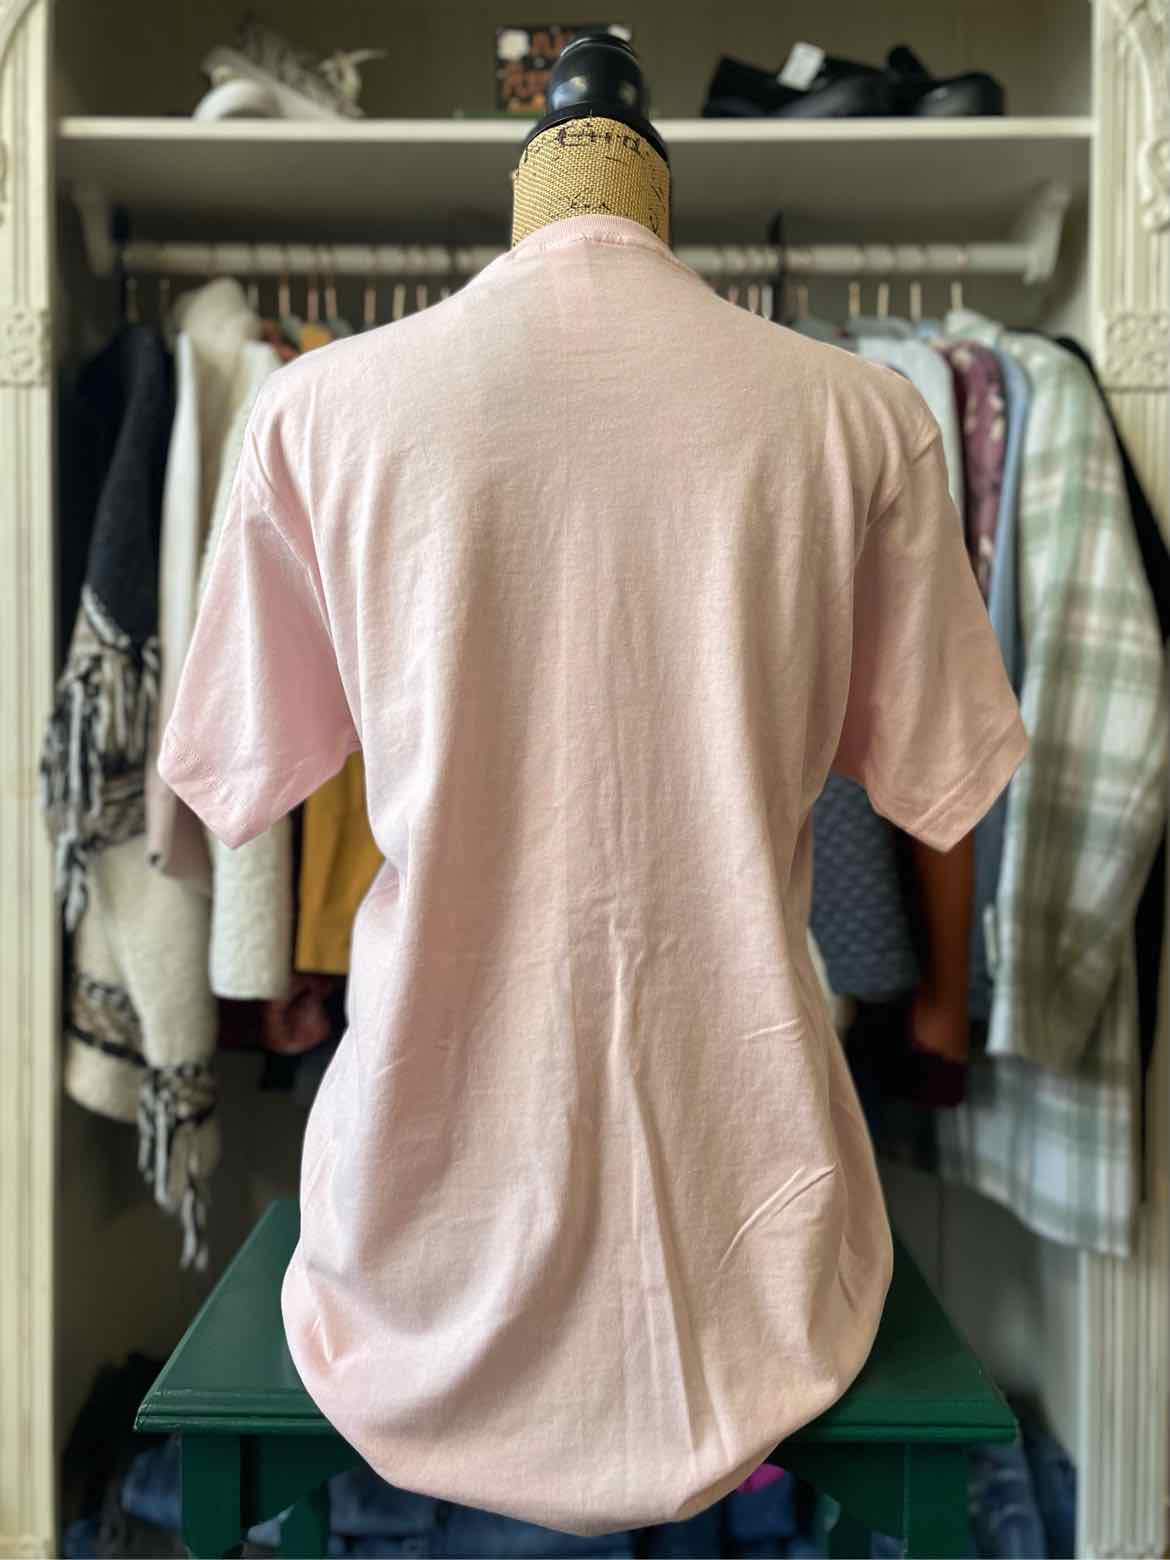 Tultex Size S Blush/Red "Loved" Tee